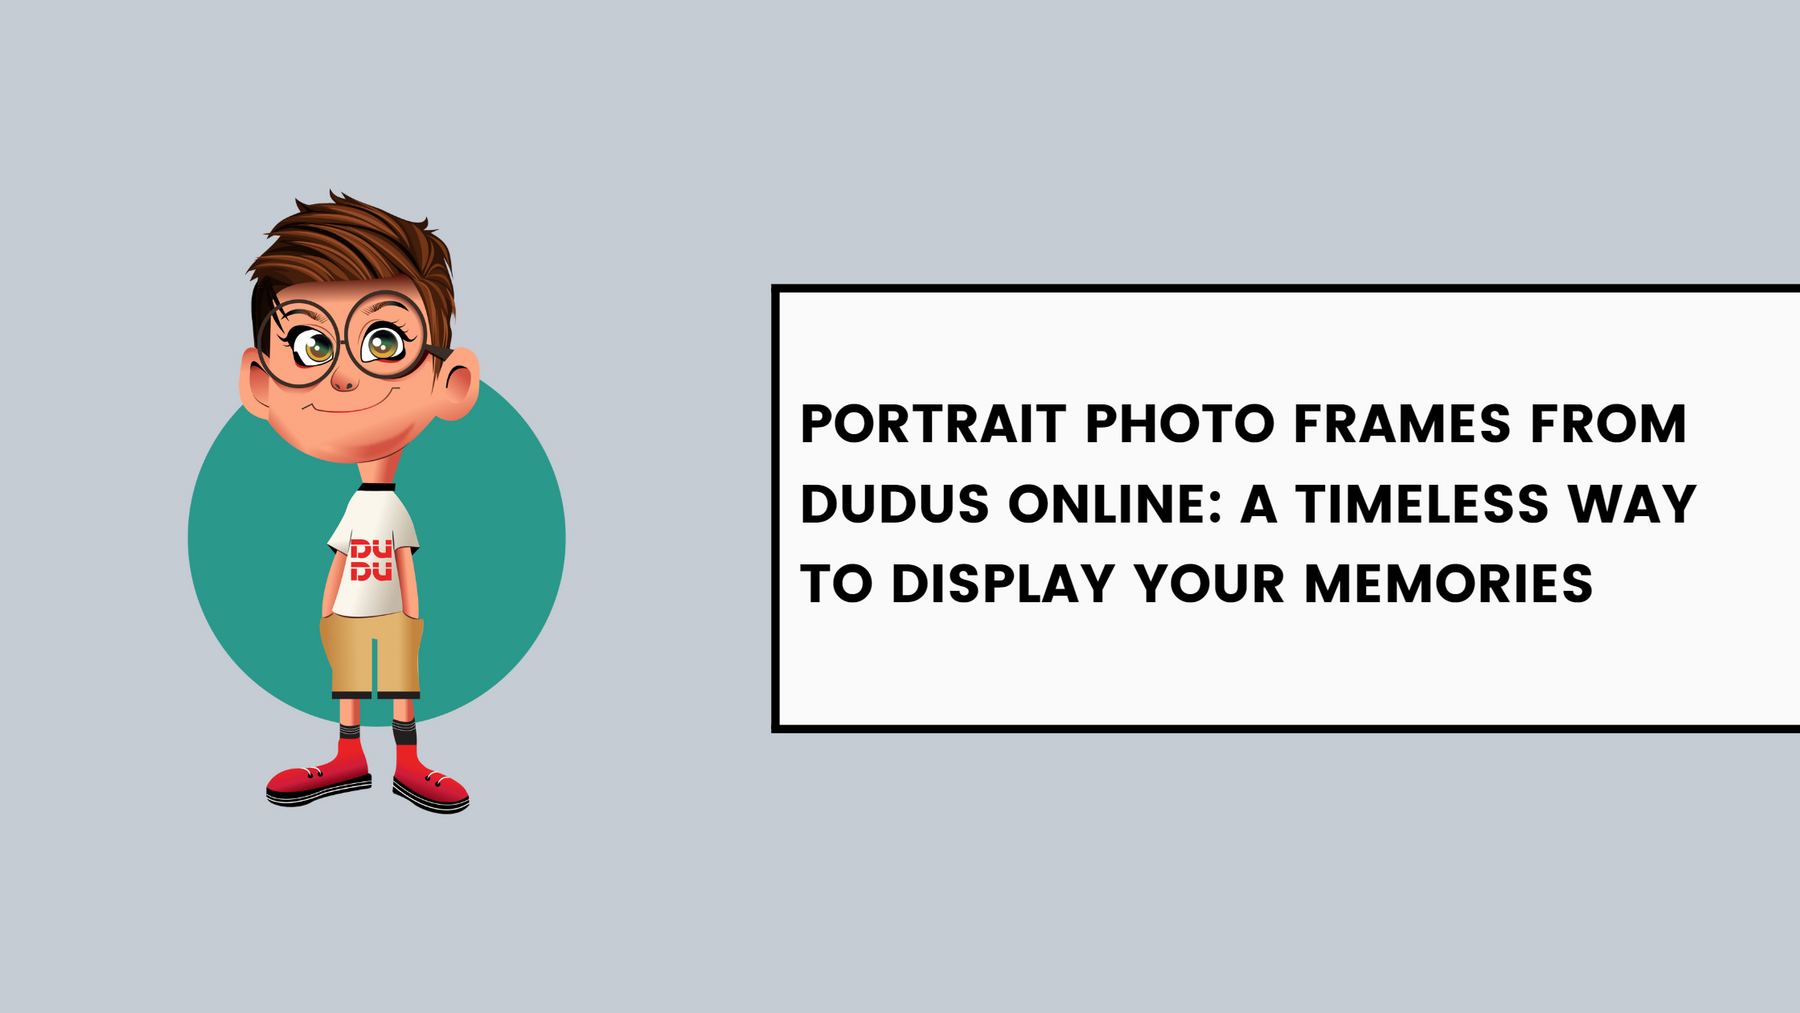 Portrait Photo Frames from Dudus Online: A Timeless Way to Display Your Memories